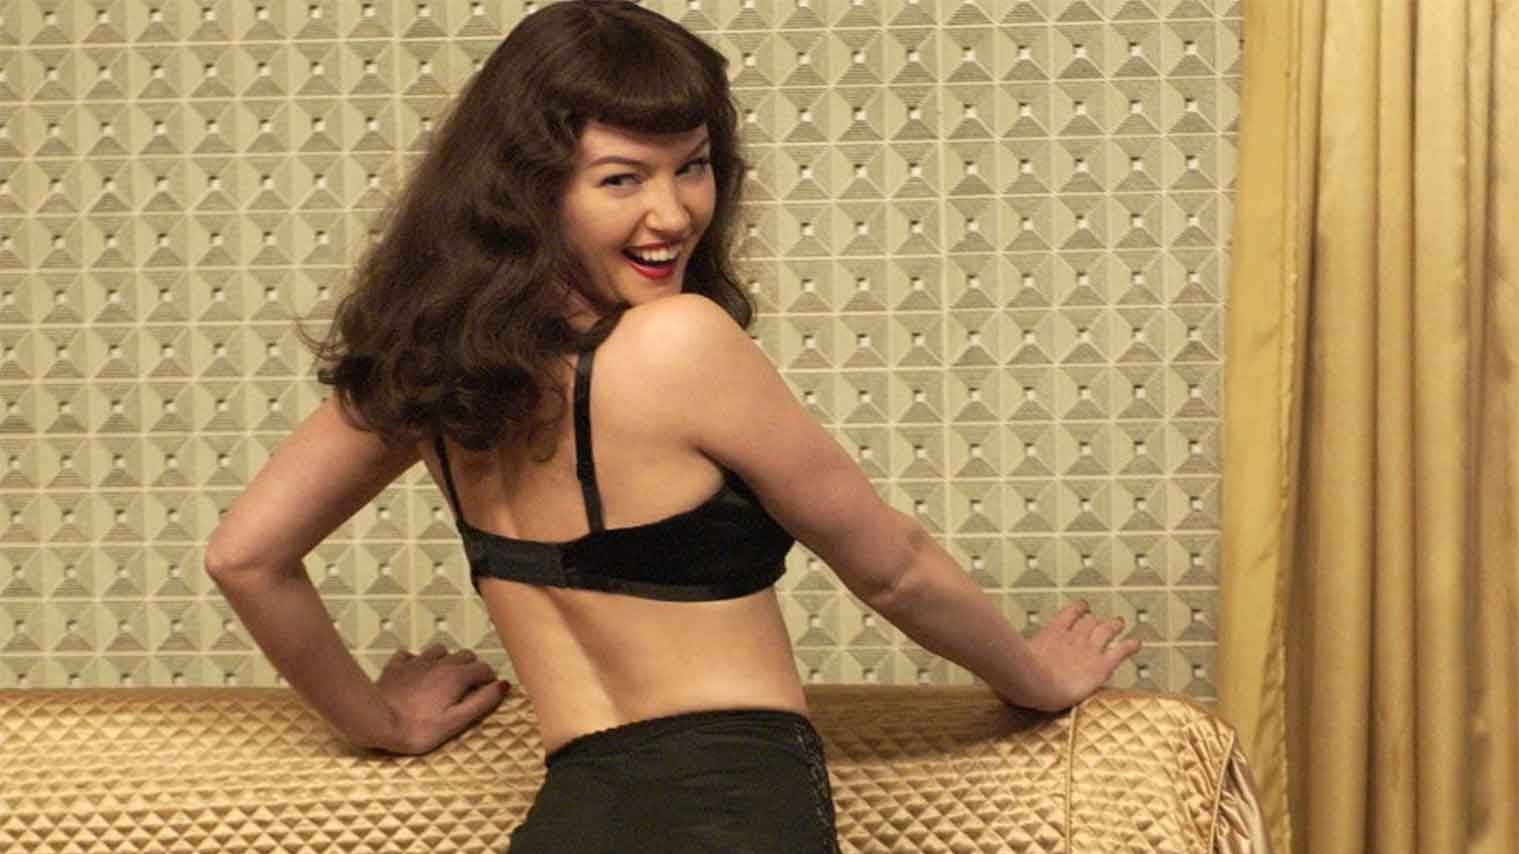 The infamous Bettie Page-Gretchen Moll